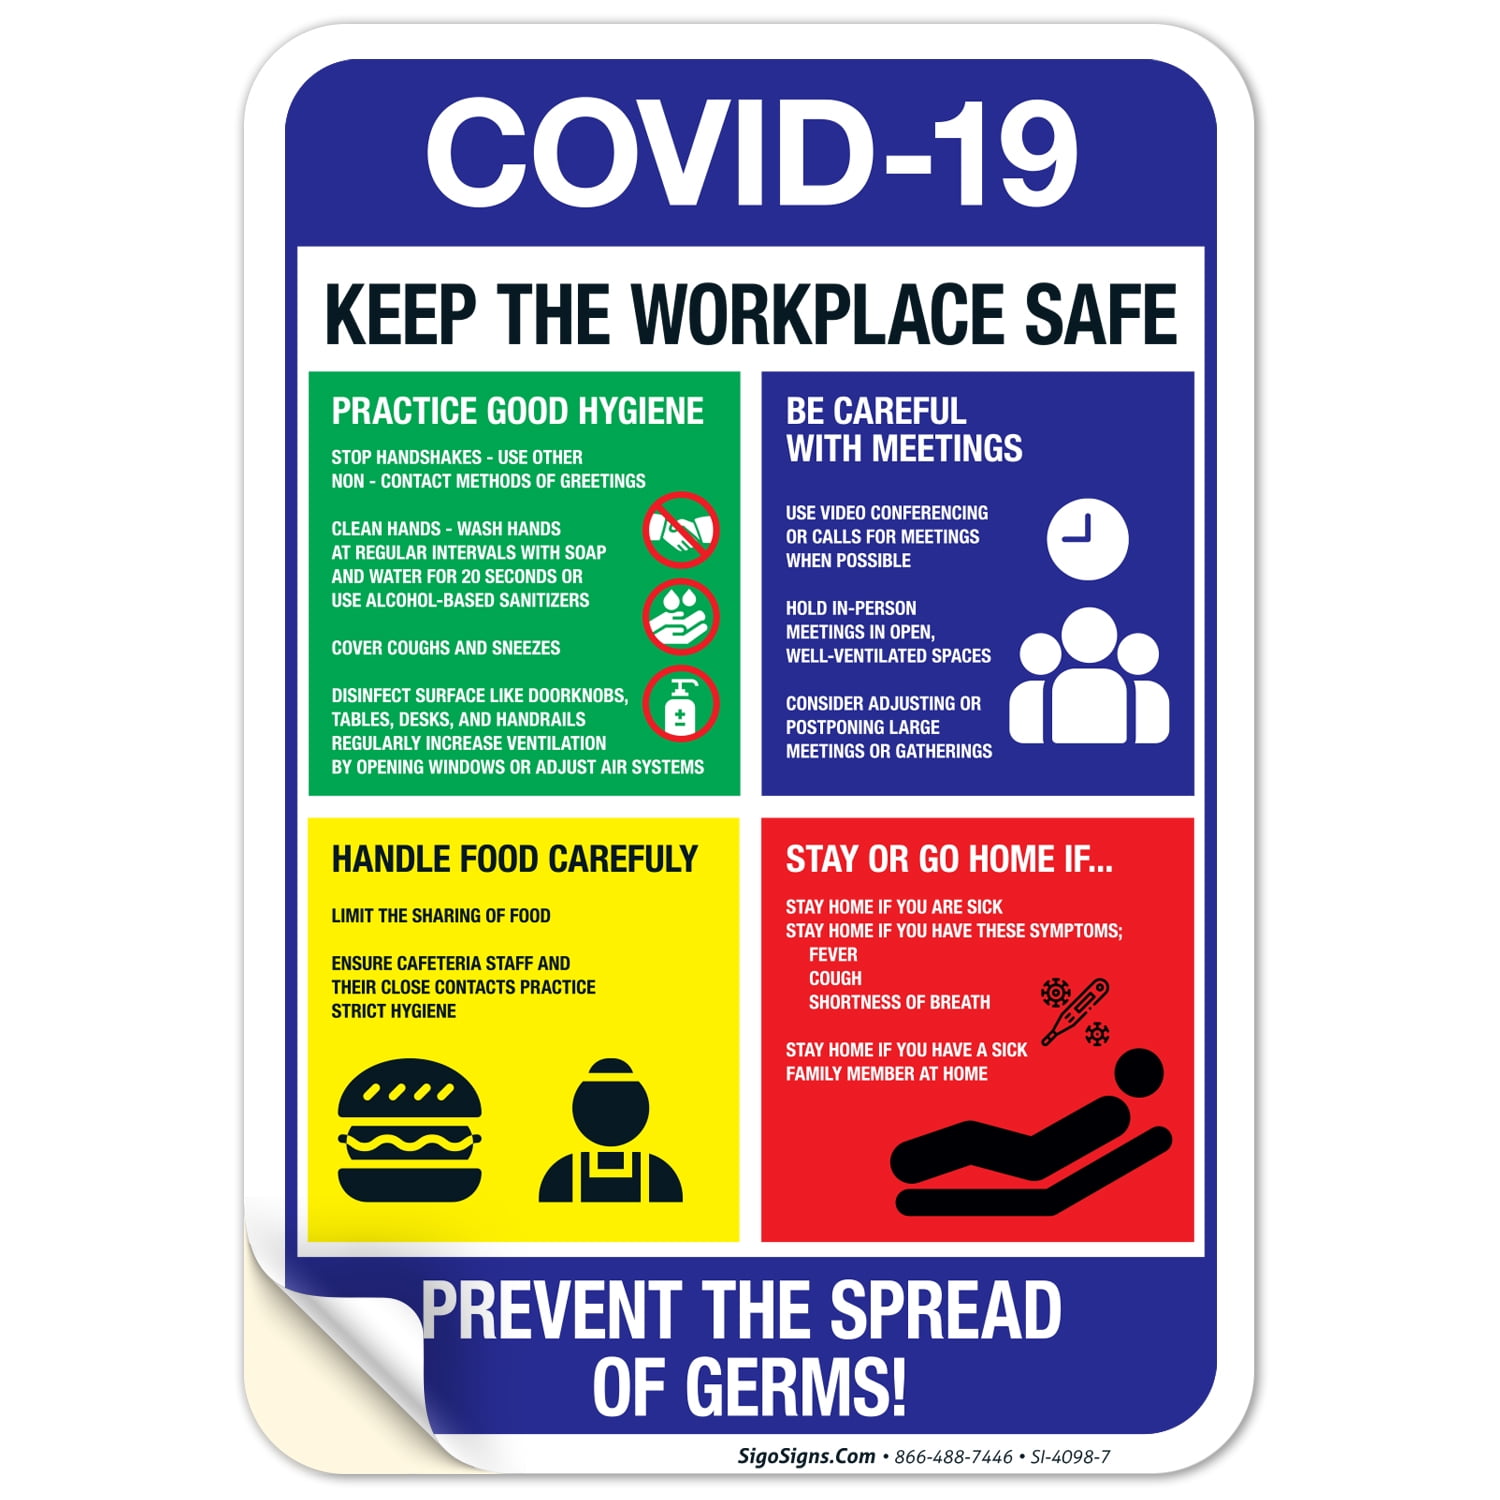 Theme:2, 5 X 2 Hemmed Edges and Metal Grommets 19 Vinyl Banner Indoor Outdoor Coronavirus Health and Safety Flex Signs Please Practice Social Distancing Stop Spread COVID 